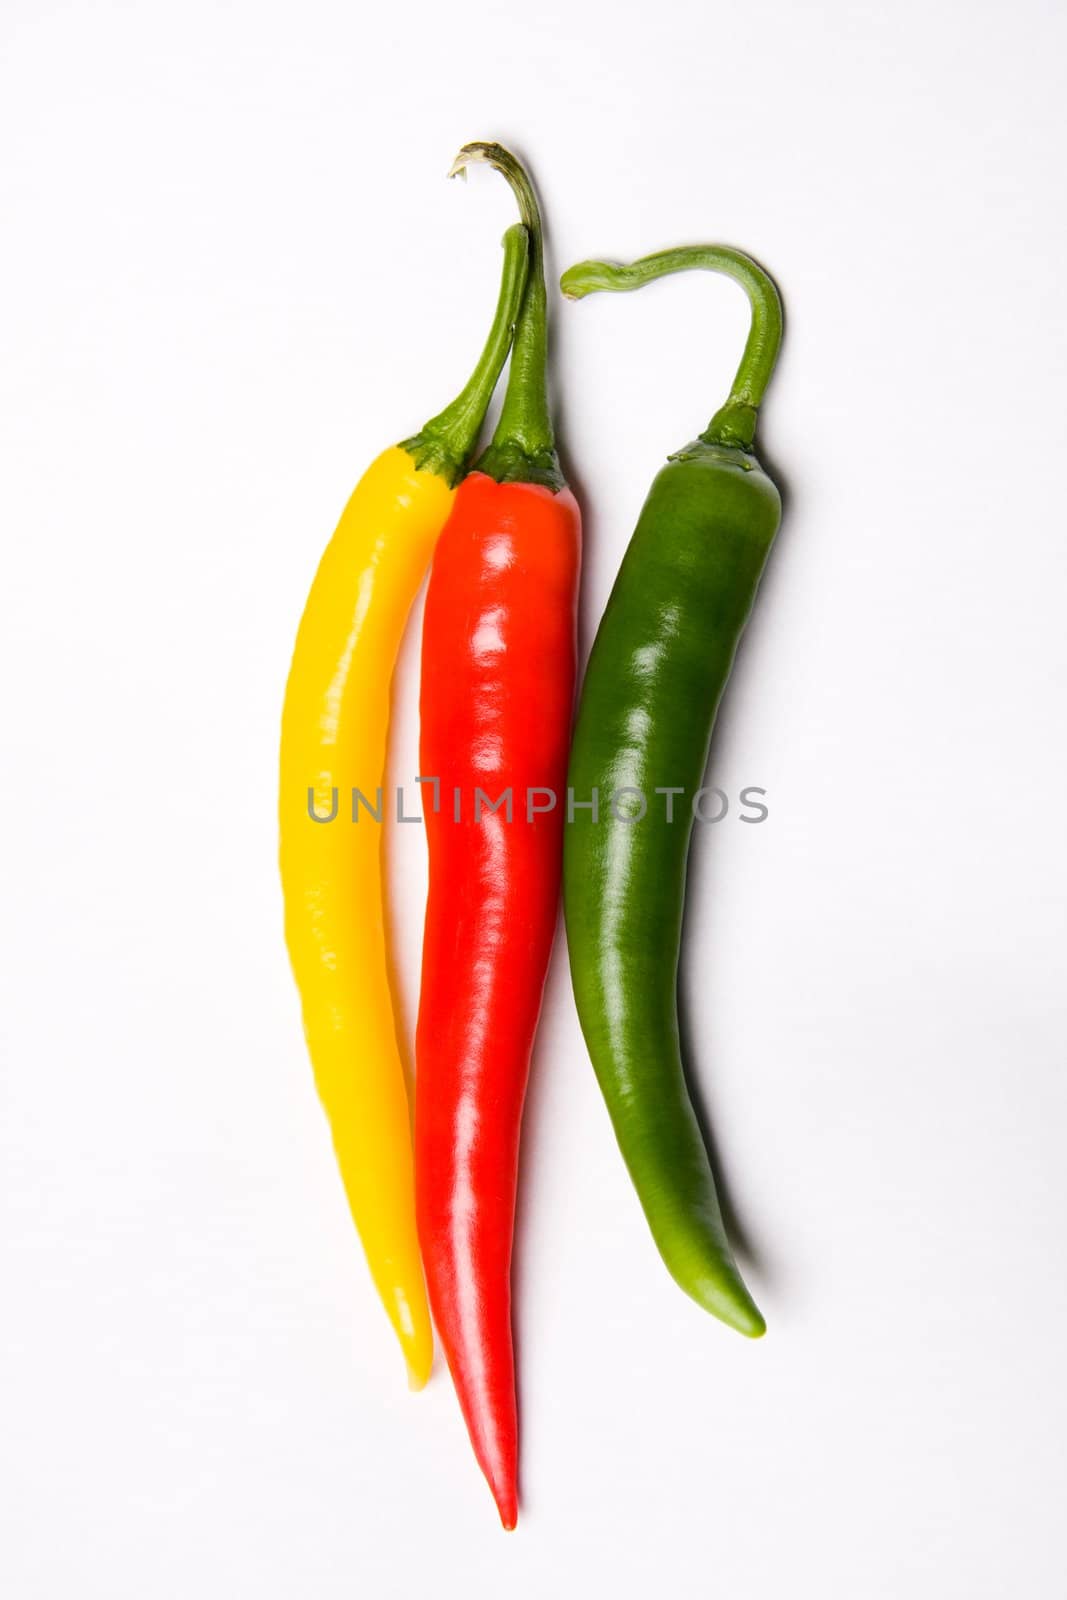 Three chili peppers, red, yellow and green on white background